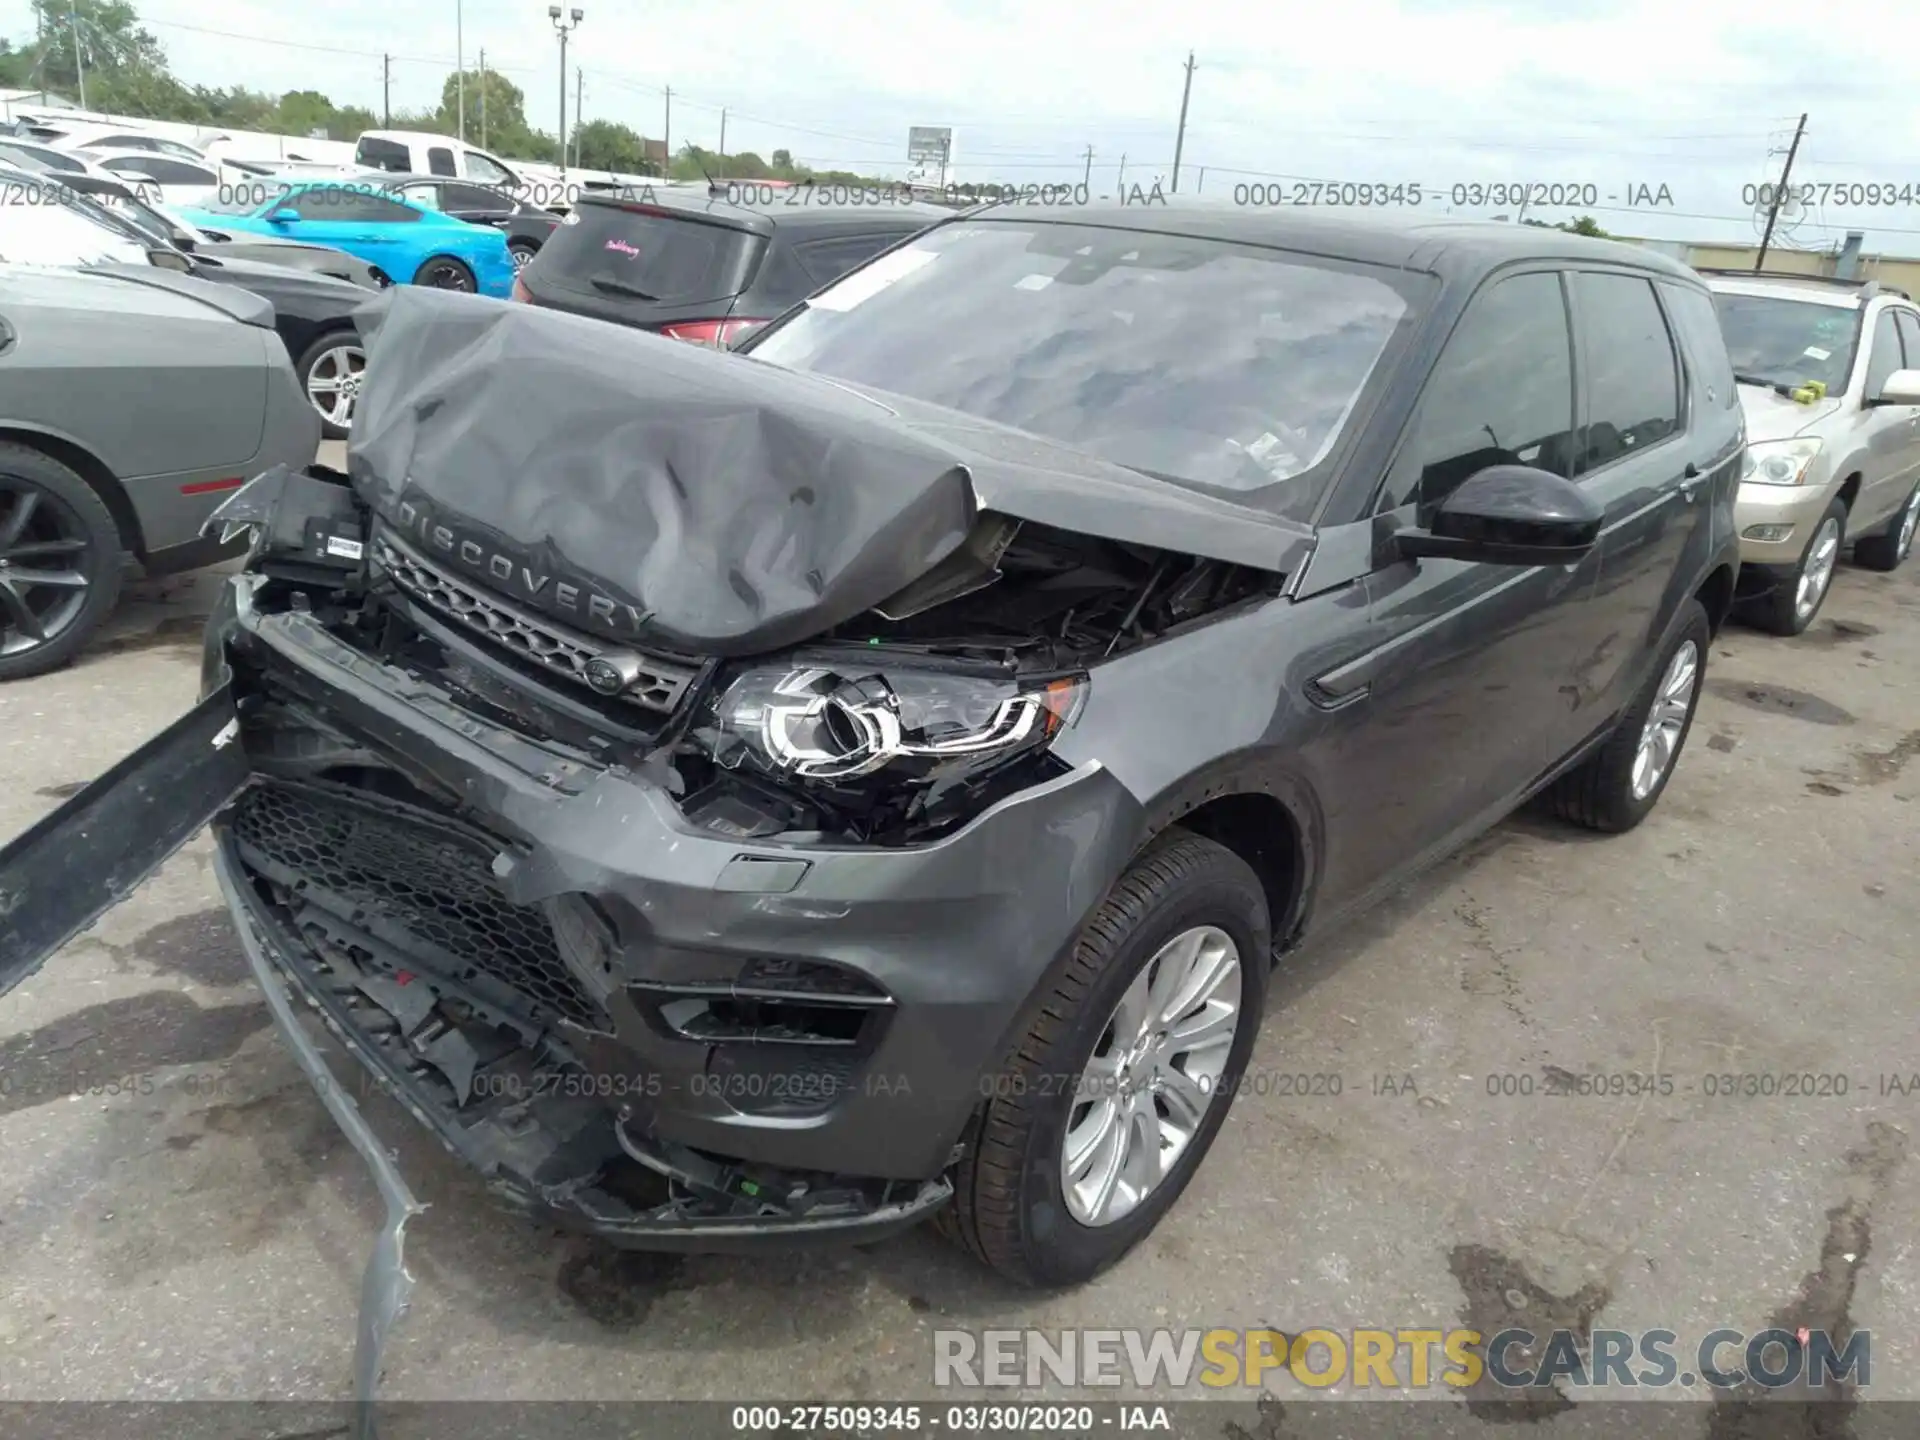 2 Photograph of a damaged car SALCP2FX9KH785673 LAND ROVER DISCOVERY SPORT 2019